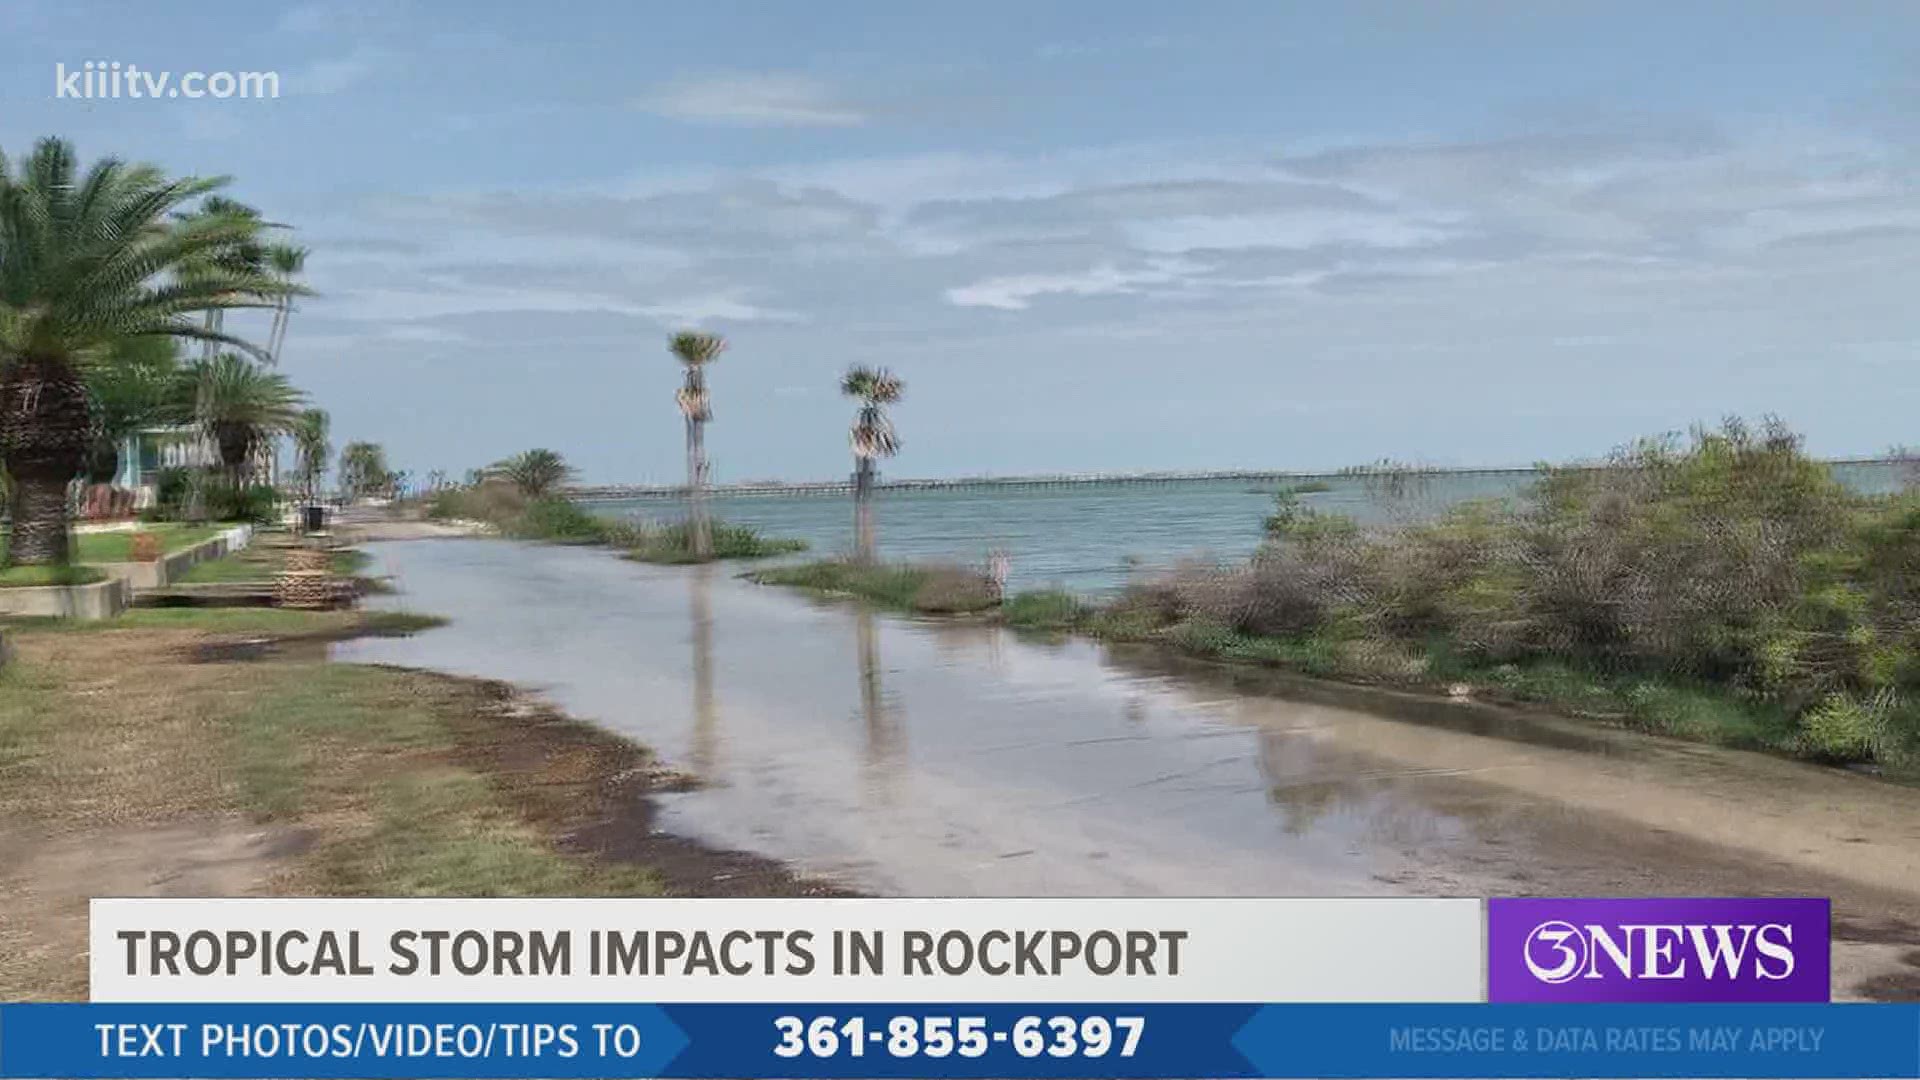 3News spoke with Rockport officials about the impacts they're feeling from the Tropical Storm and how they're preparing residents for potential flooding.